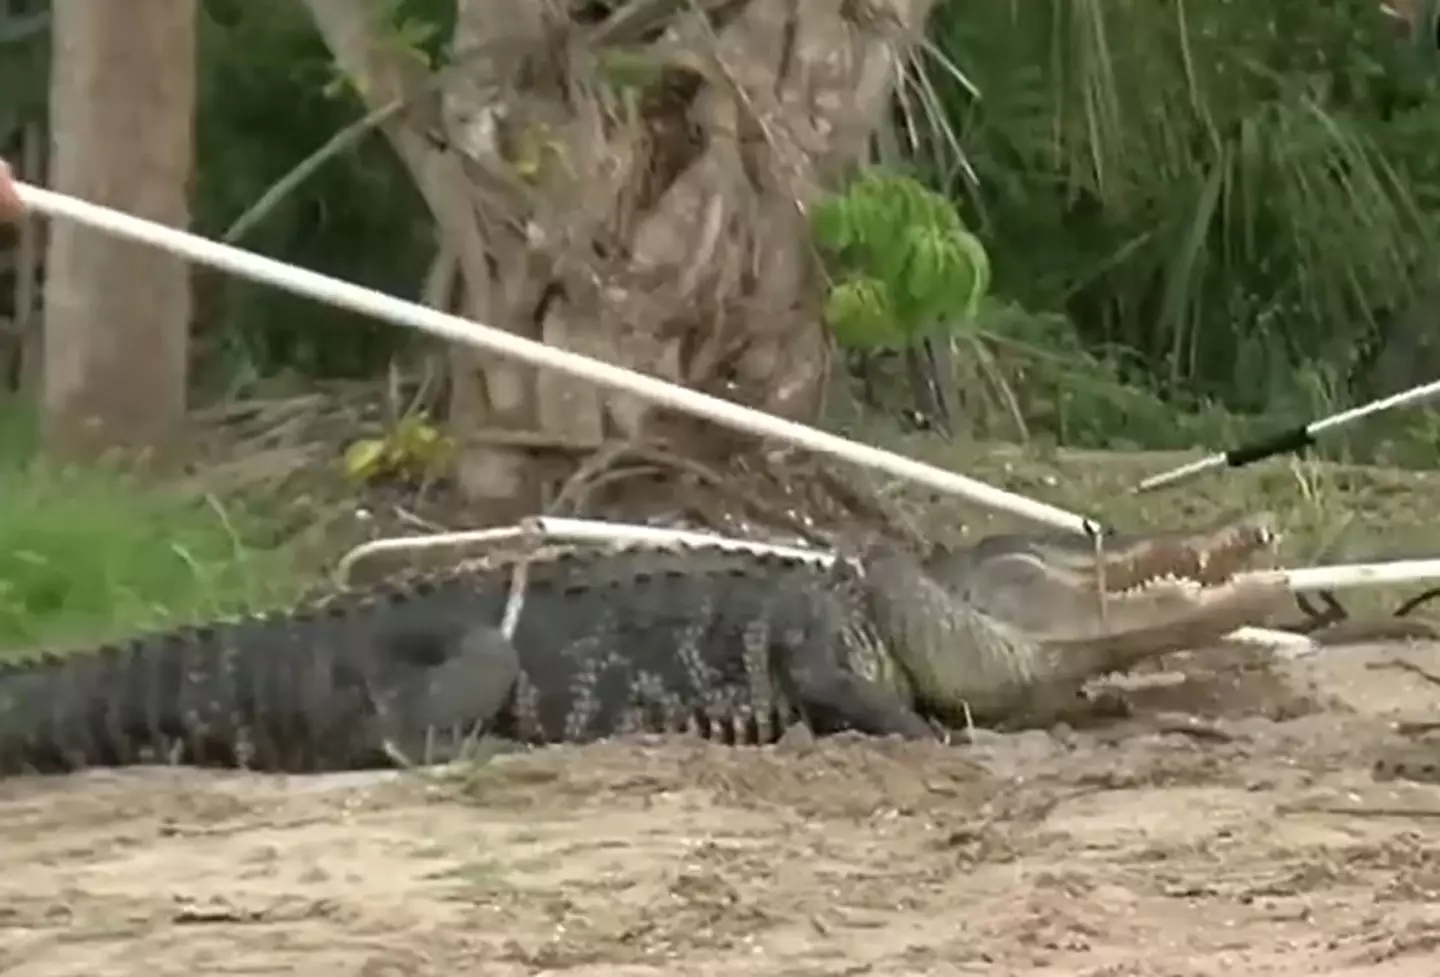 The 10 foot long alligator bit off a man's arm above the elbow after he fell into water.